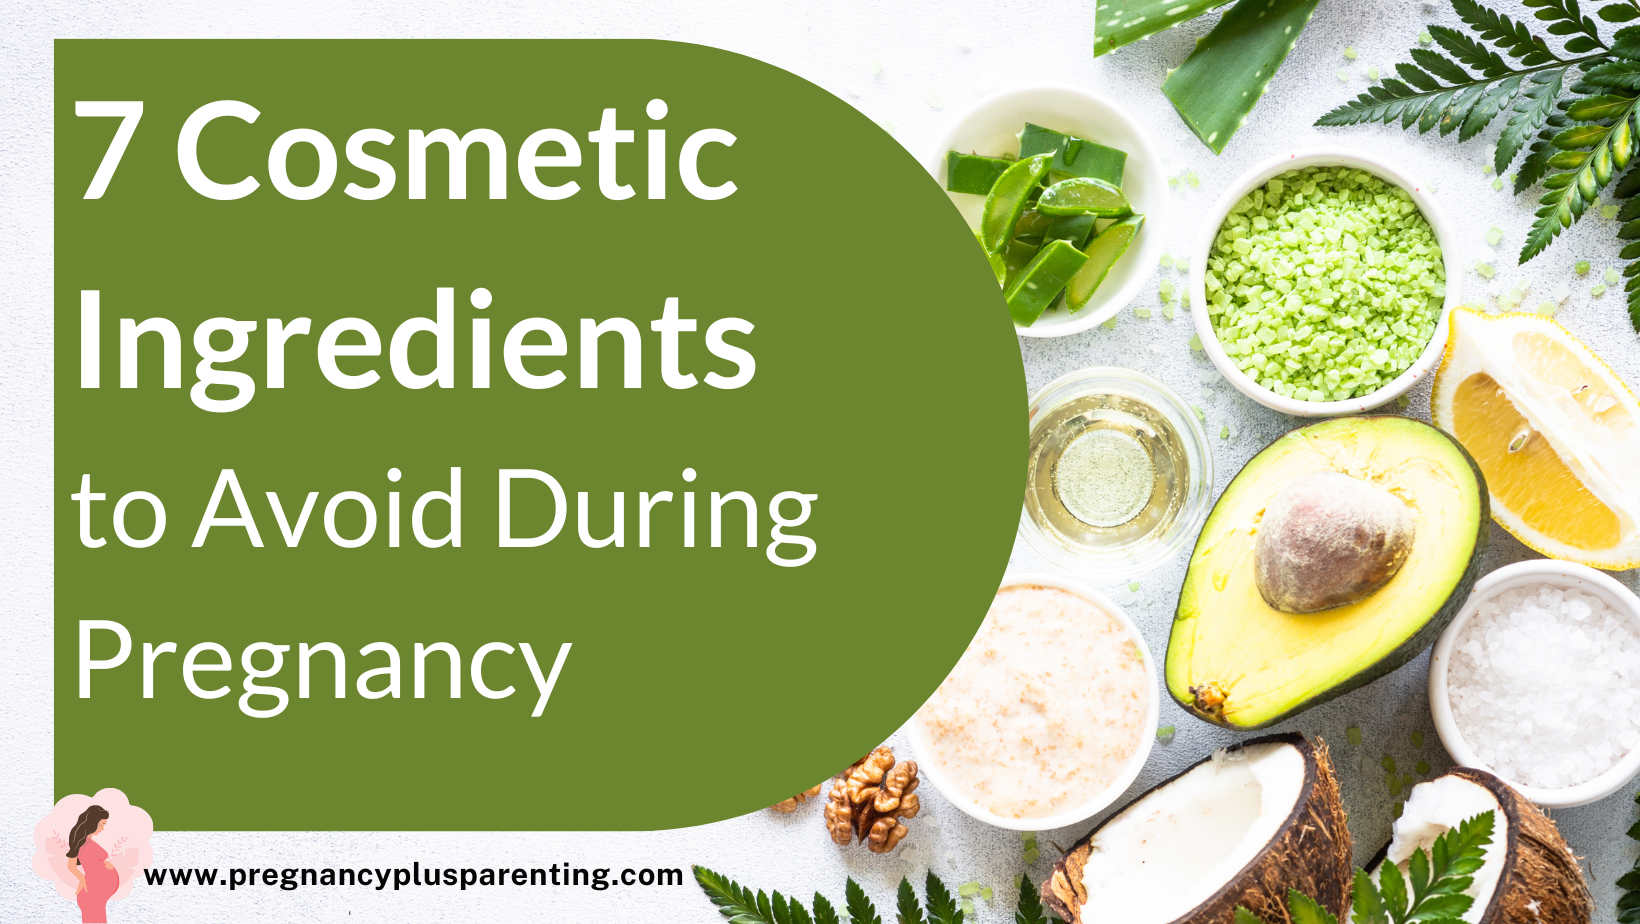 7 Cosmetic Ingredients to Avoid During Pregnancy